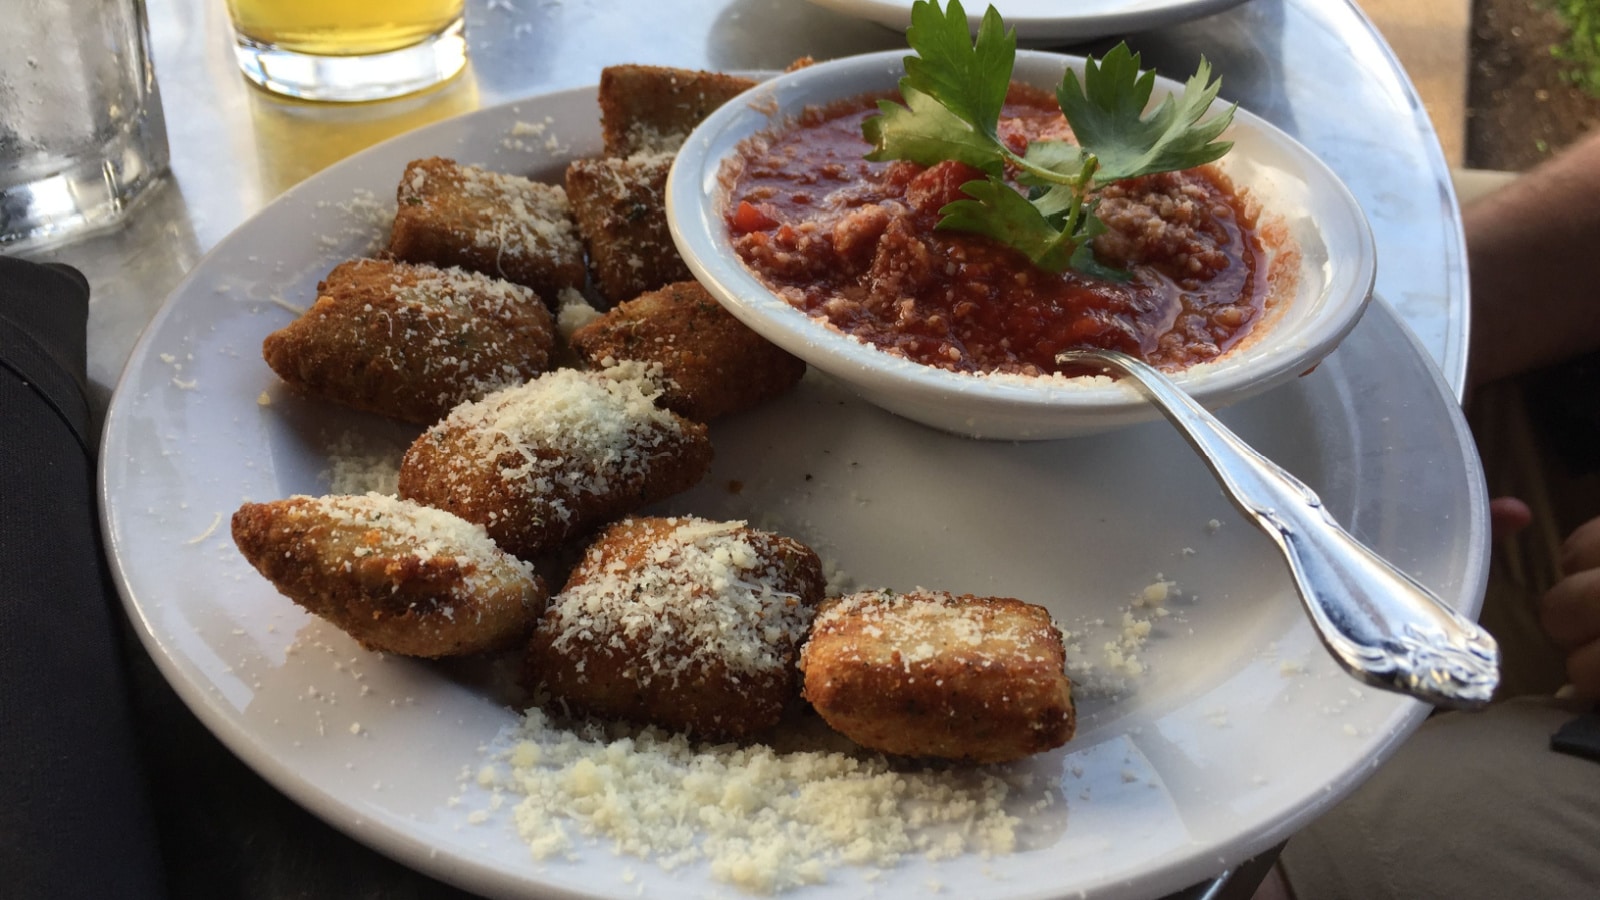 Toasted ravioli sprinkled with parmesan cheese with marinara sauce garnished with parsley on a white plate at an Italian restaurant on The Hill in St. Louis, Missouri, USA.